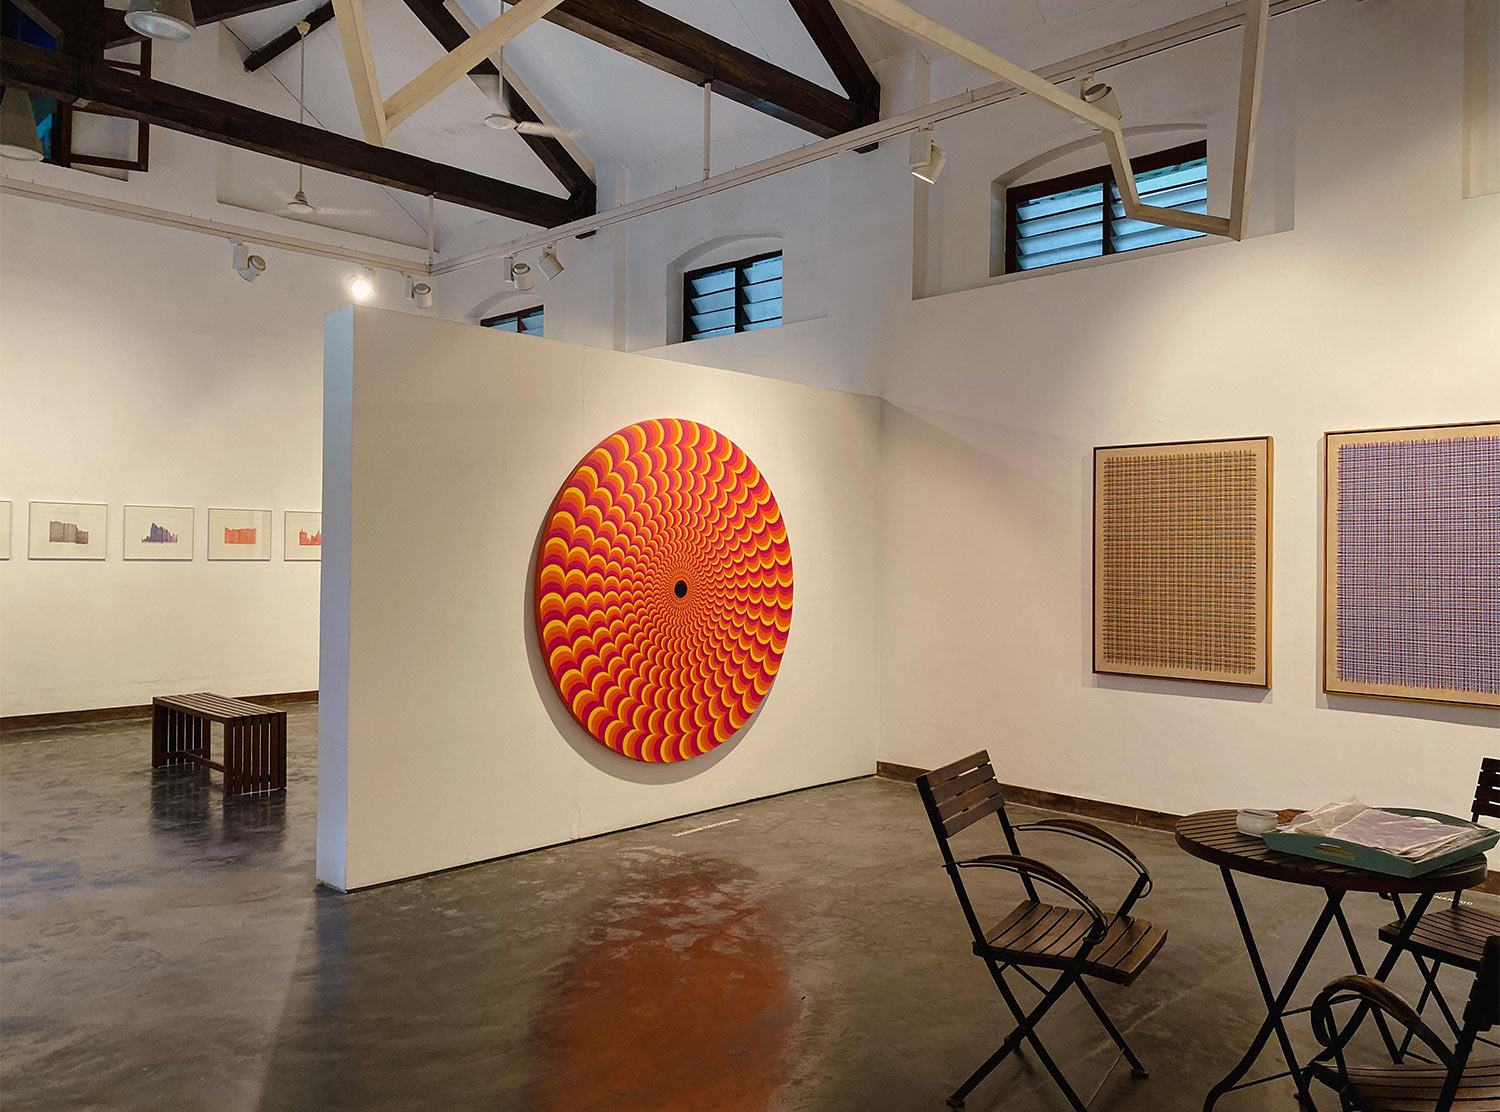 Gallery OED featuring artworks exploring the interaction of primary colors